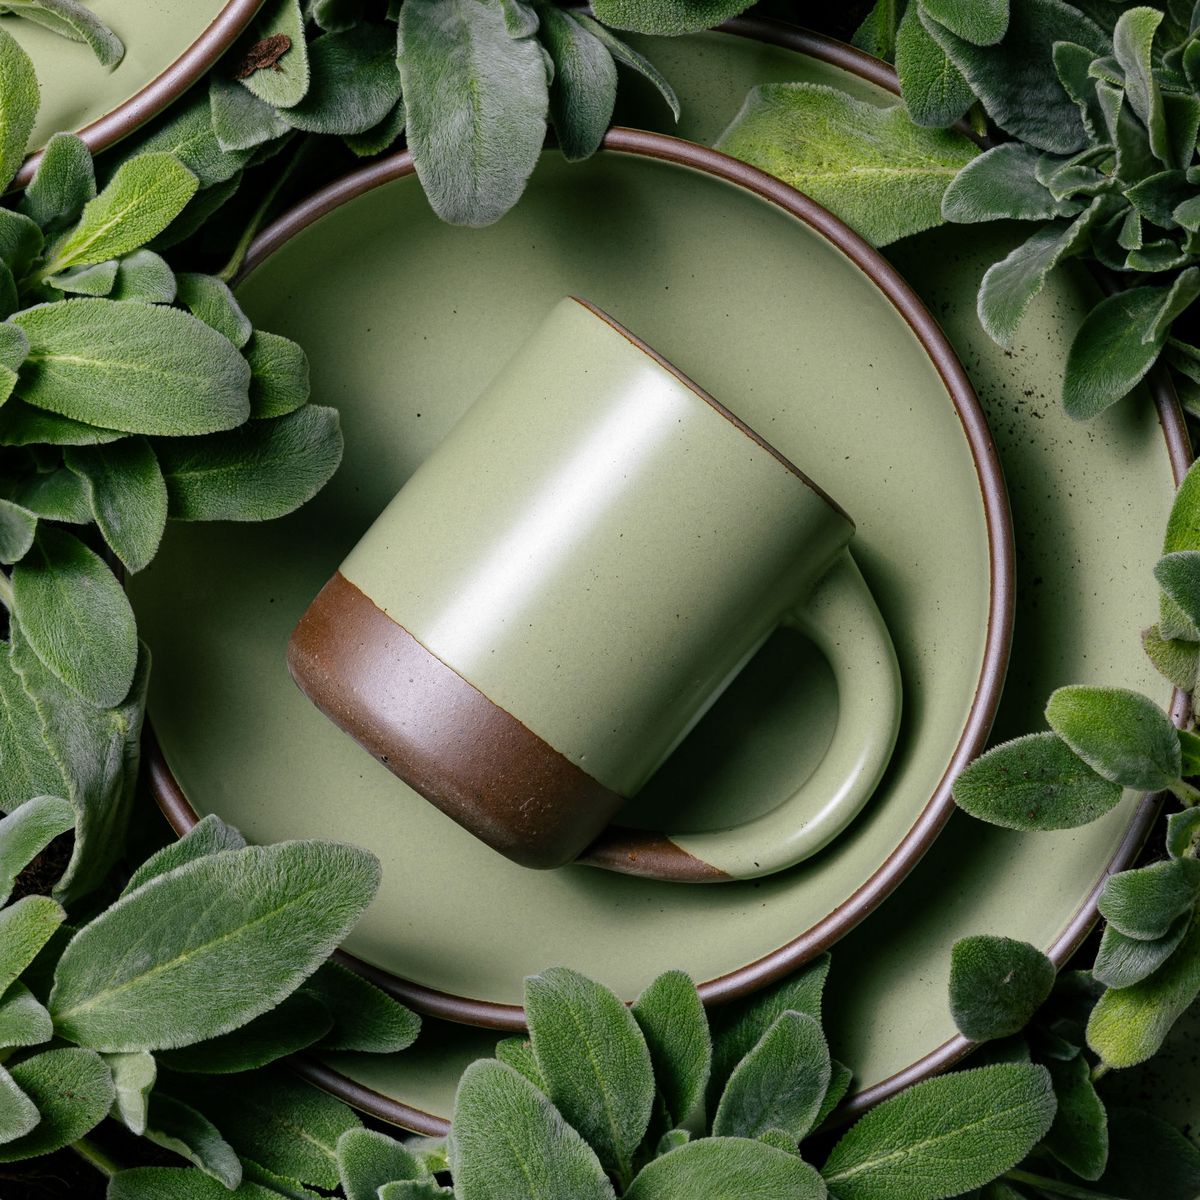 A medium sized ceramic mug with handle in a calming sage green color featuring iron speckles and unglazed rim and bottom base, surrounded by lamb's ear greenery and sitting on a ceramic plate of the same color.